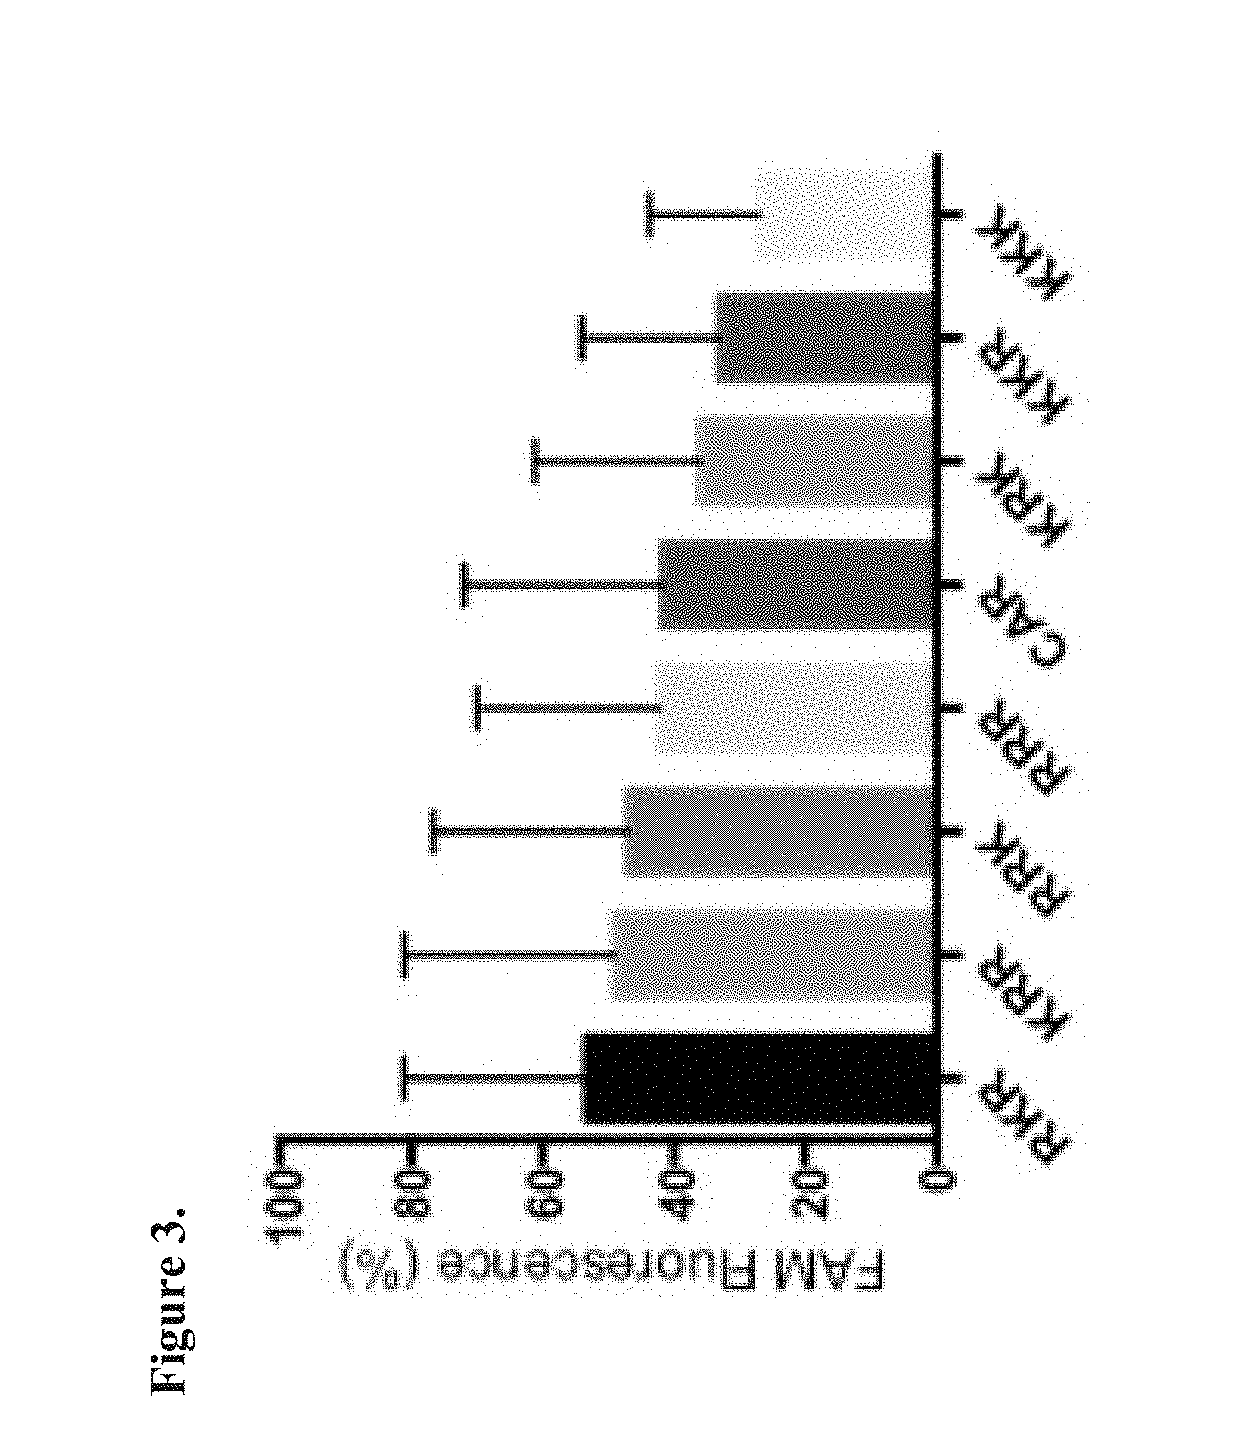 Compositions Containing a Pharmacophore with Selectivity to Diseased Tissue and Methods of Making Same